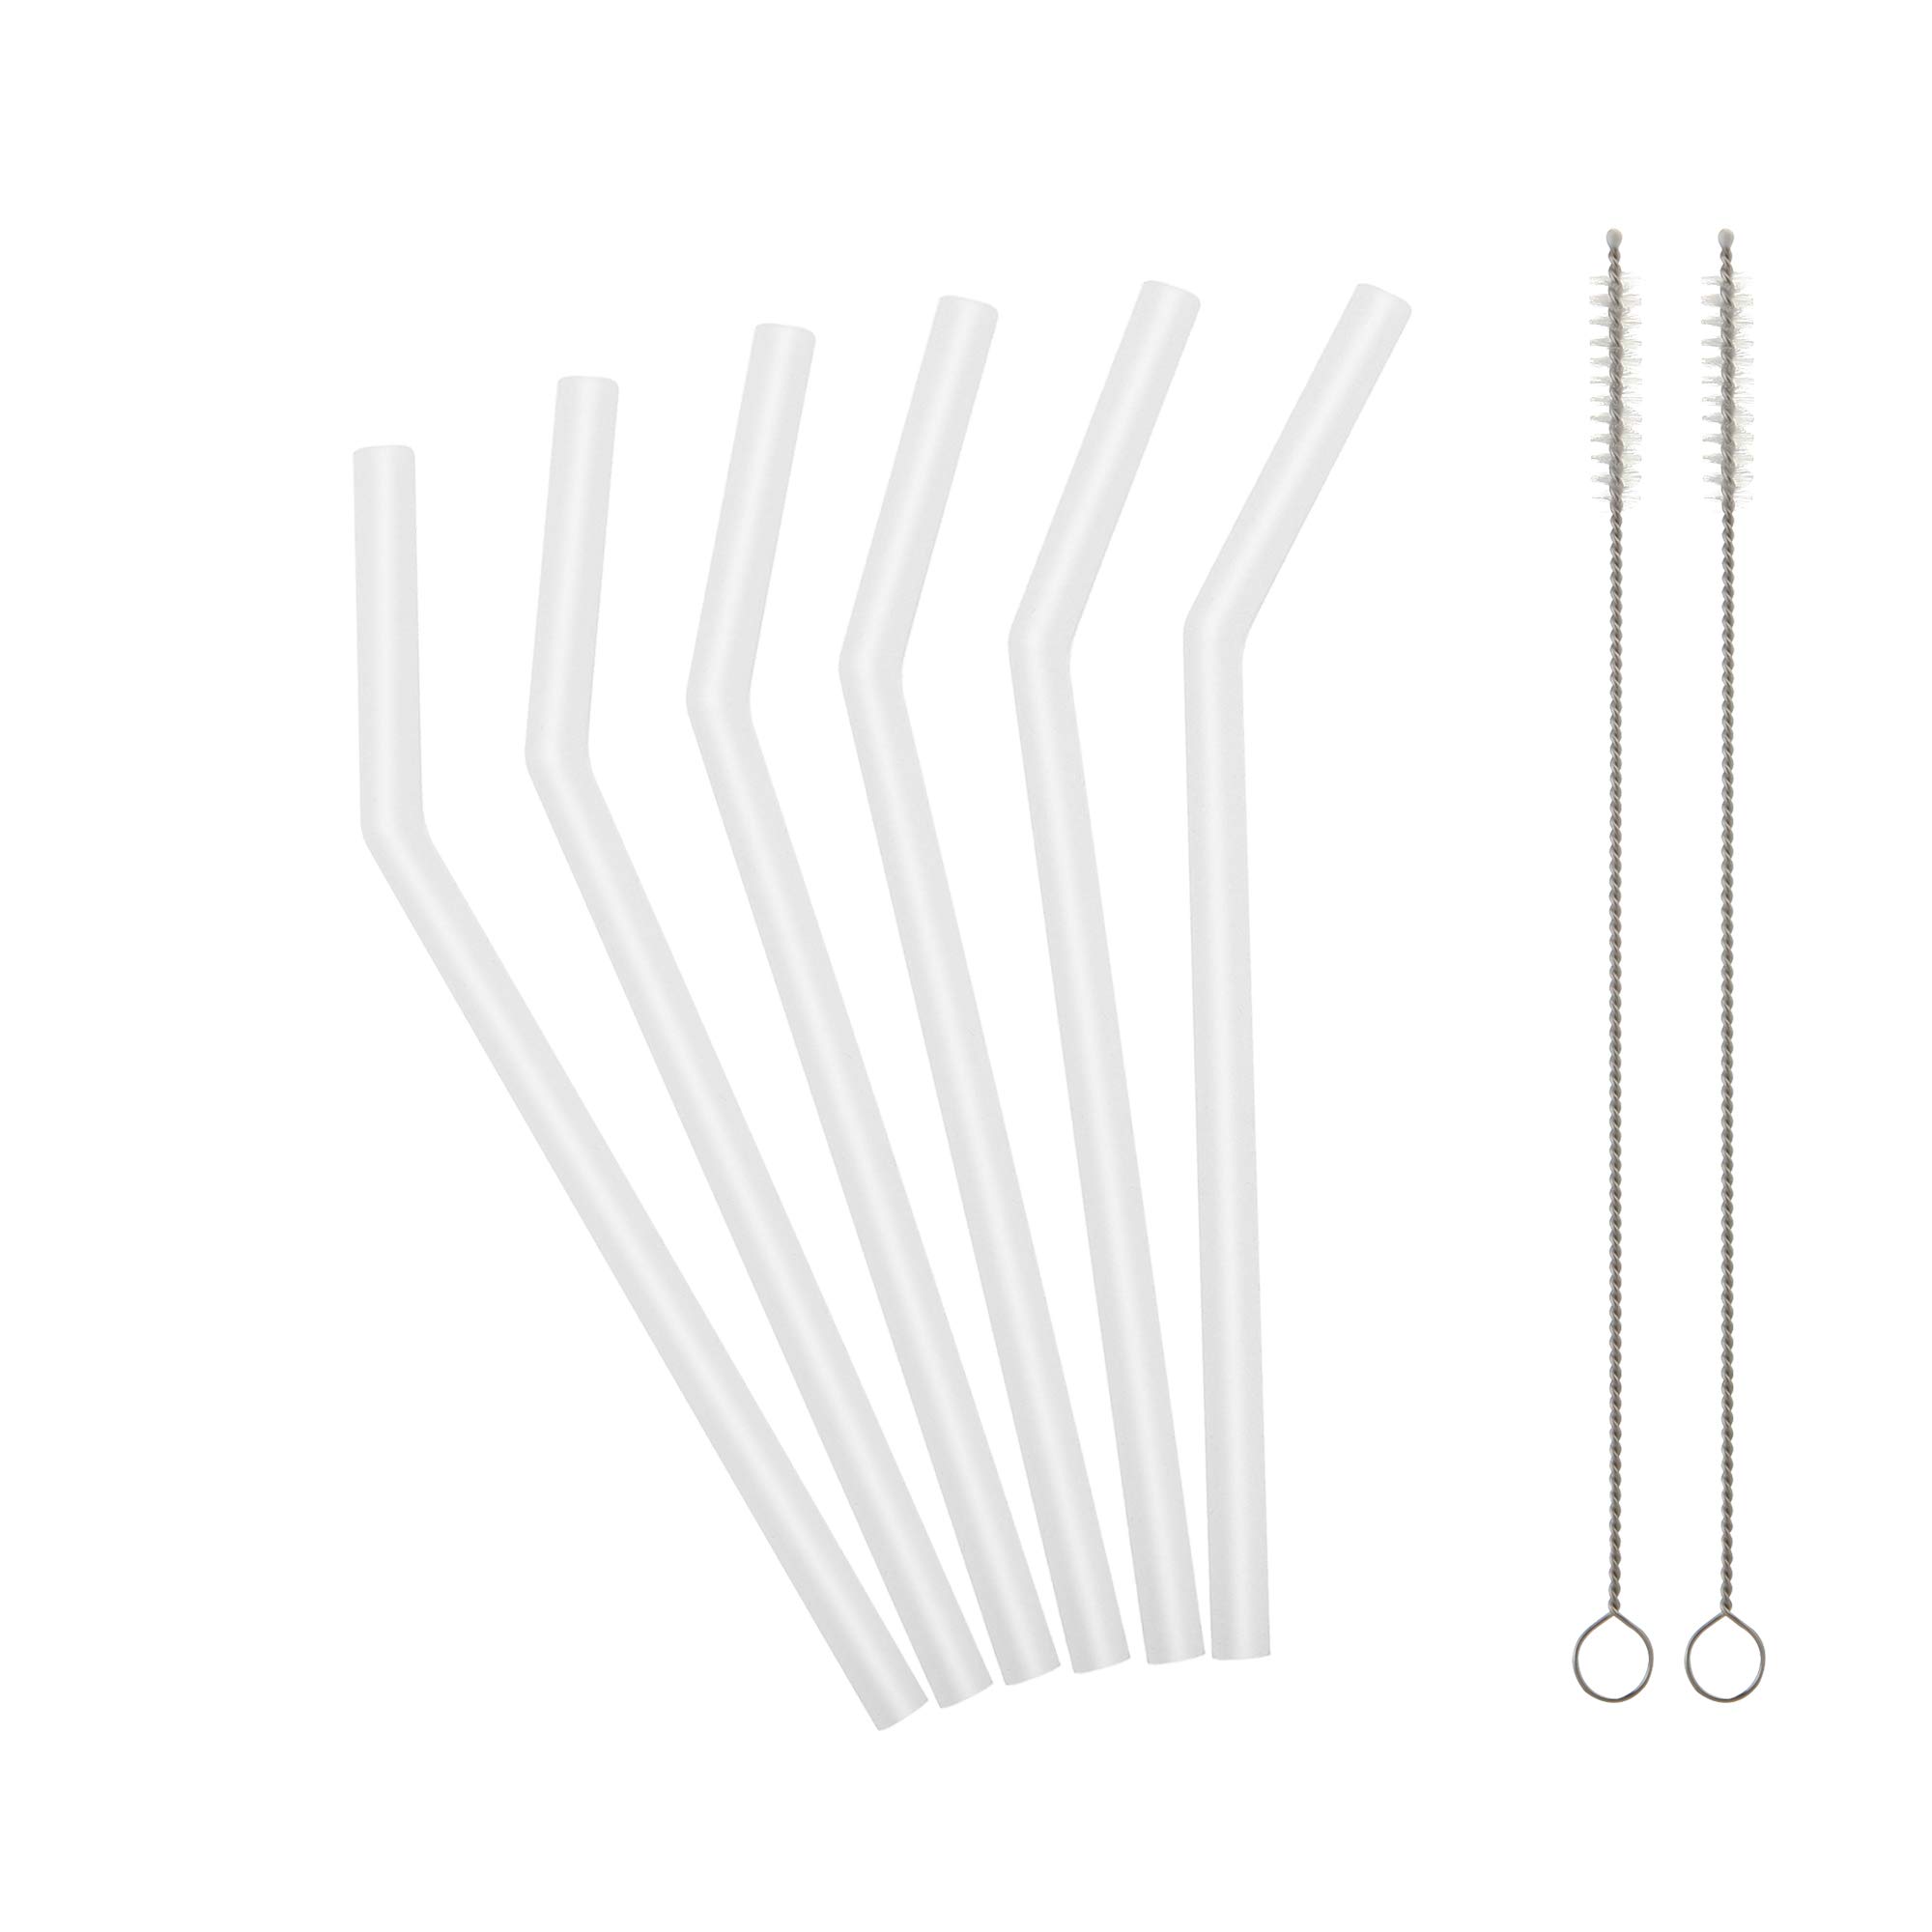  Reusable Silicone Straws for Toddlers & Kids - 12 pcs Flexible  Short Drink 6.7 Straws for 6-12 oz Yeti/Rtic/Ozark Tumblers & 4 Cleaning  Brushes - BPA free, Eco-friendly,no Rubber Tast 